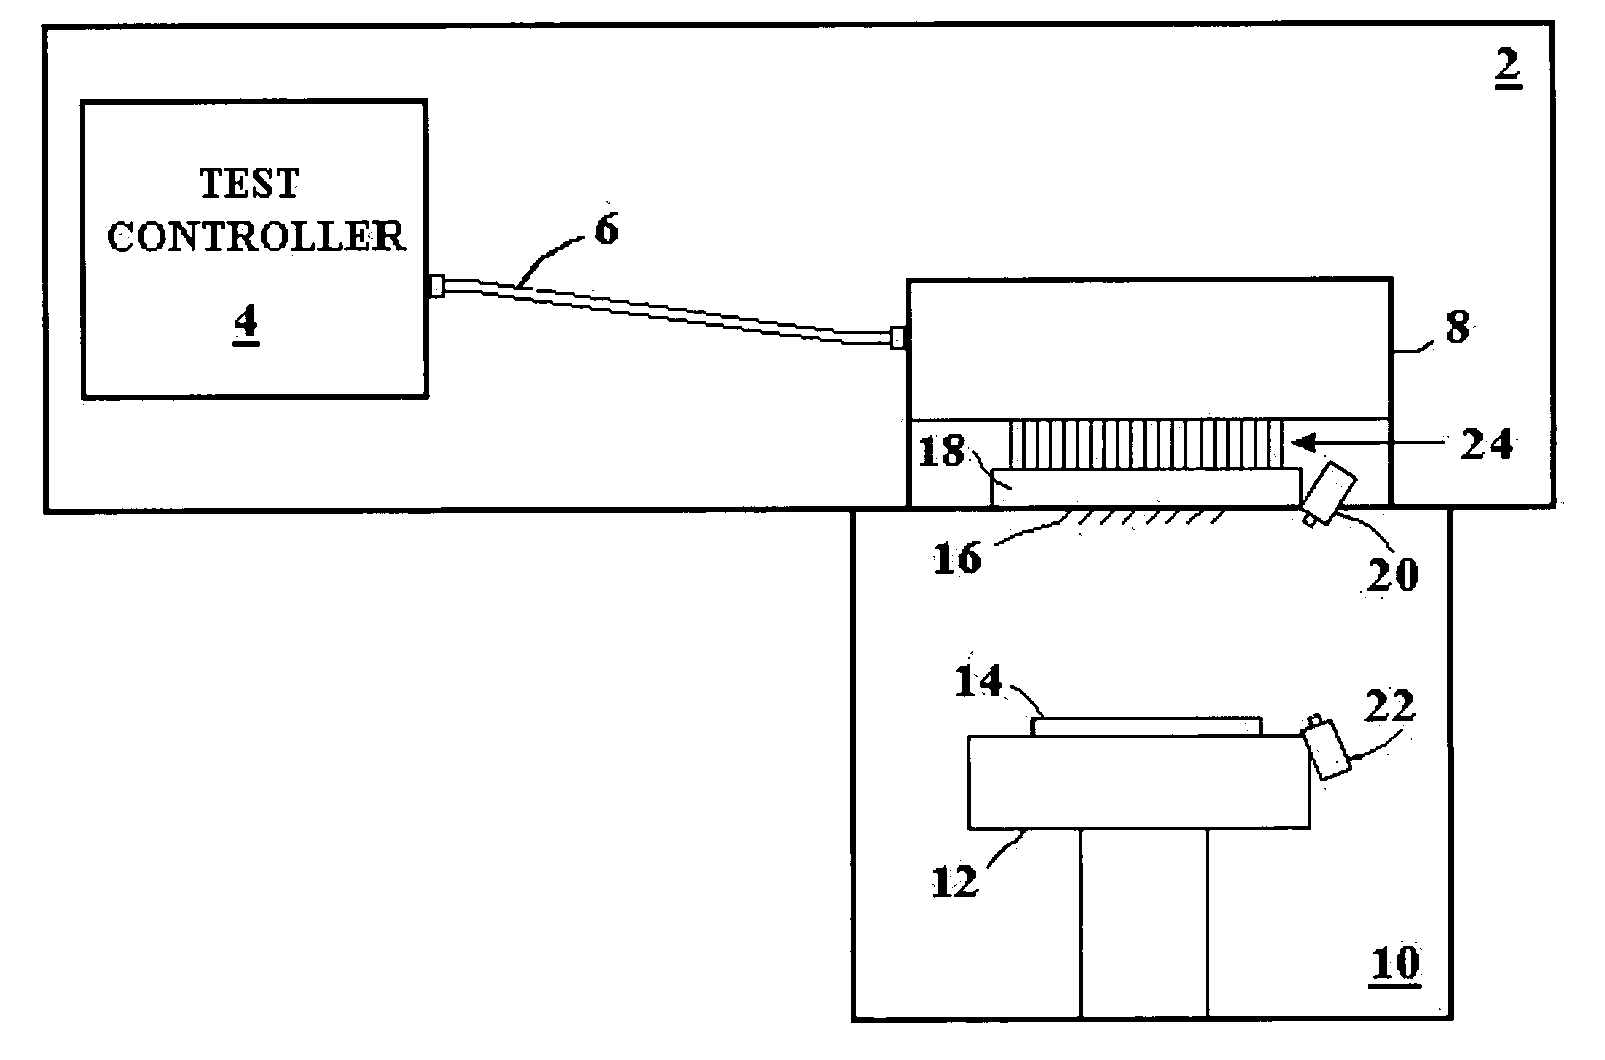 Isolation buffers with controlled equal time delays